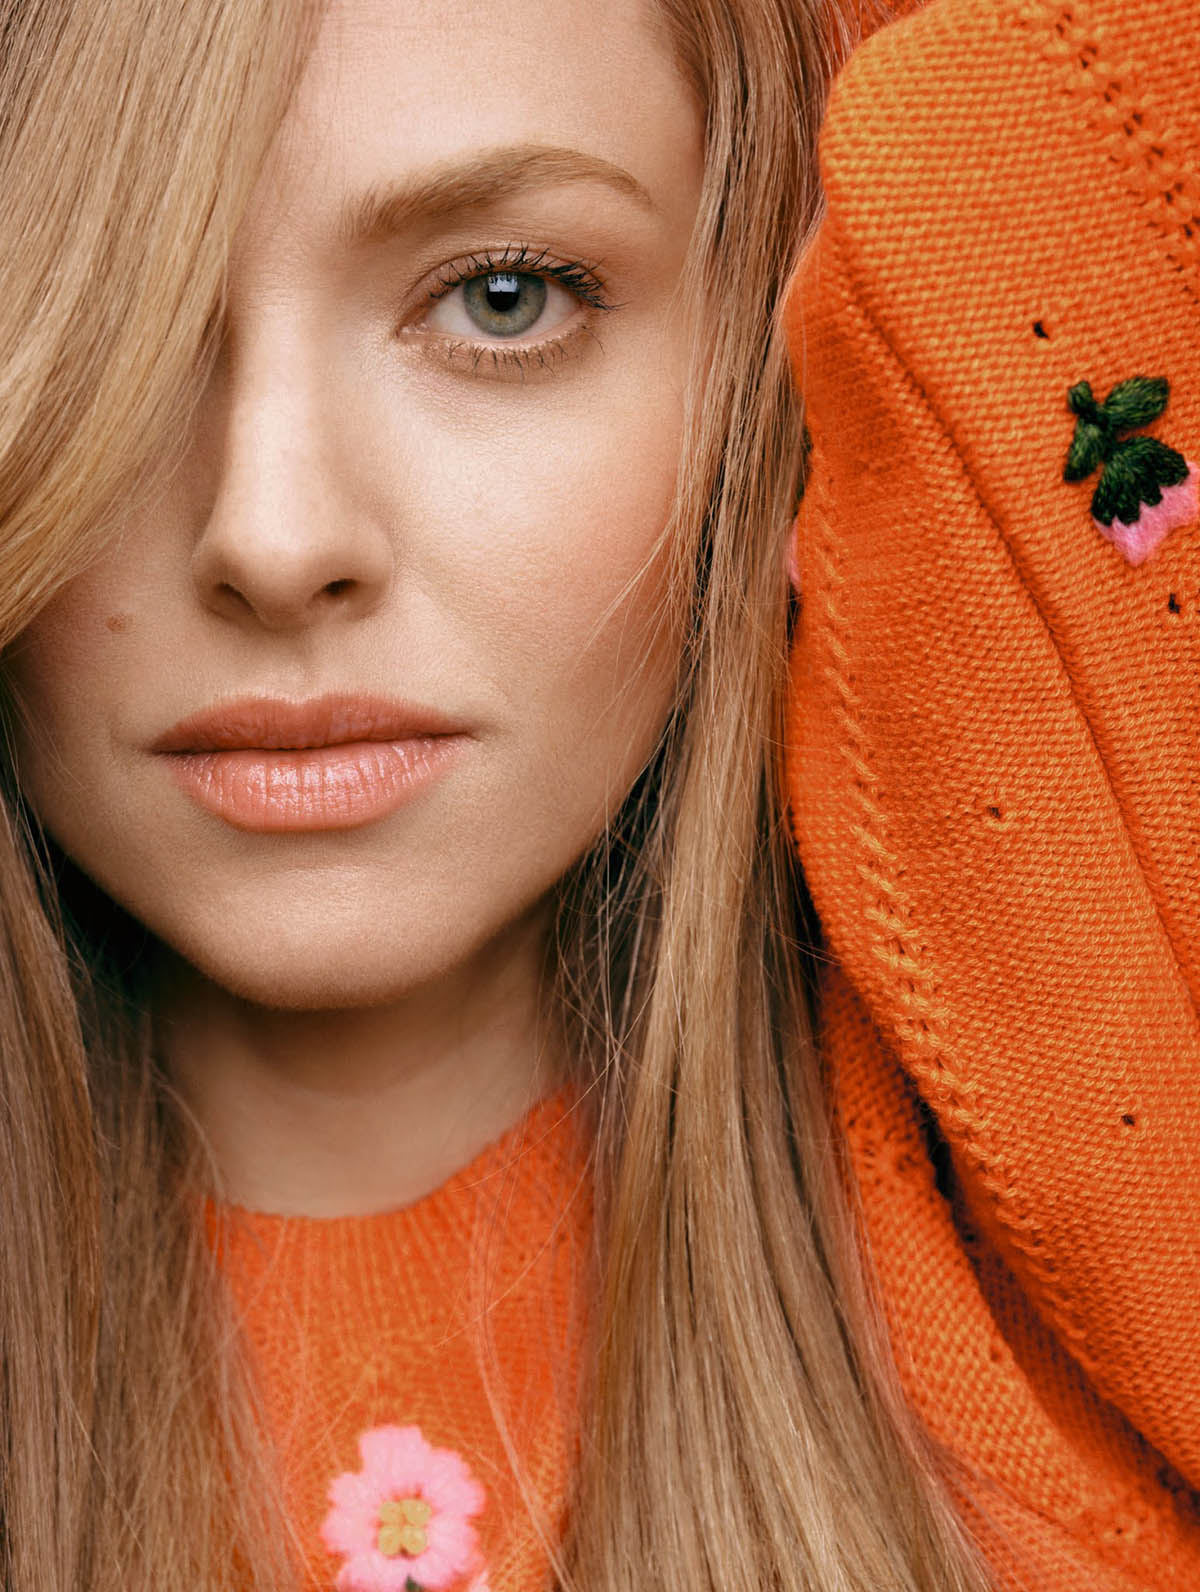 Amanda Seyfried covers The Sunday Times Style January 31st, 2021 by Bjorn Iooss